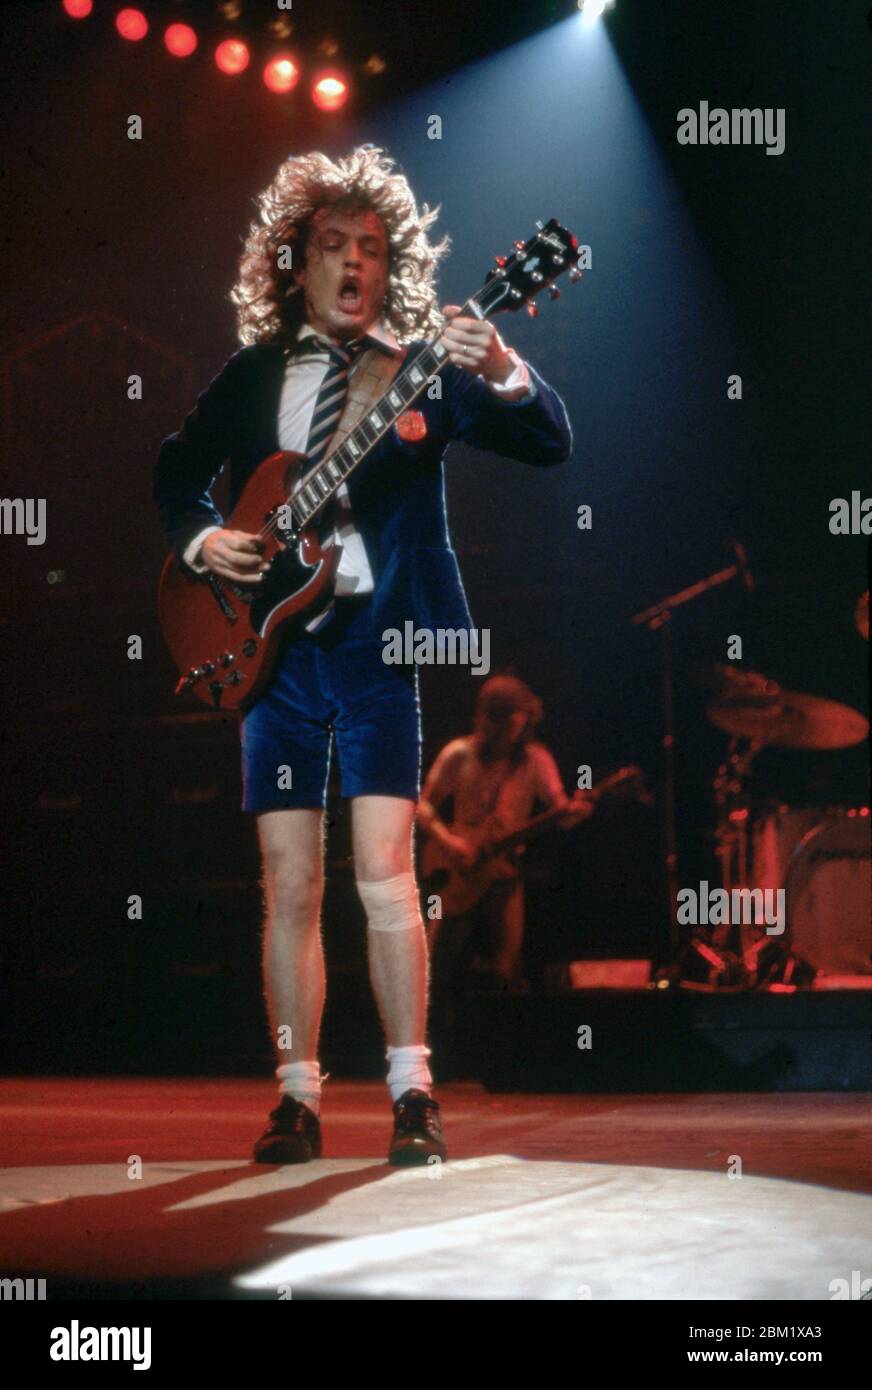 DETROIT - NOVEMBER 17: Angus Young, lead guitarist for AC/DC, wearing his  iconic British schoolboy uniform and playing his red Gibson SG, performs  during the Flick of the Switch/Monsters of Rock tour,